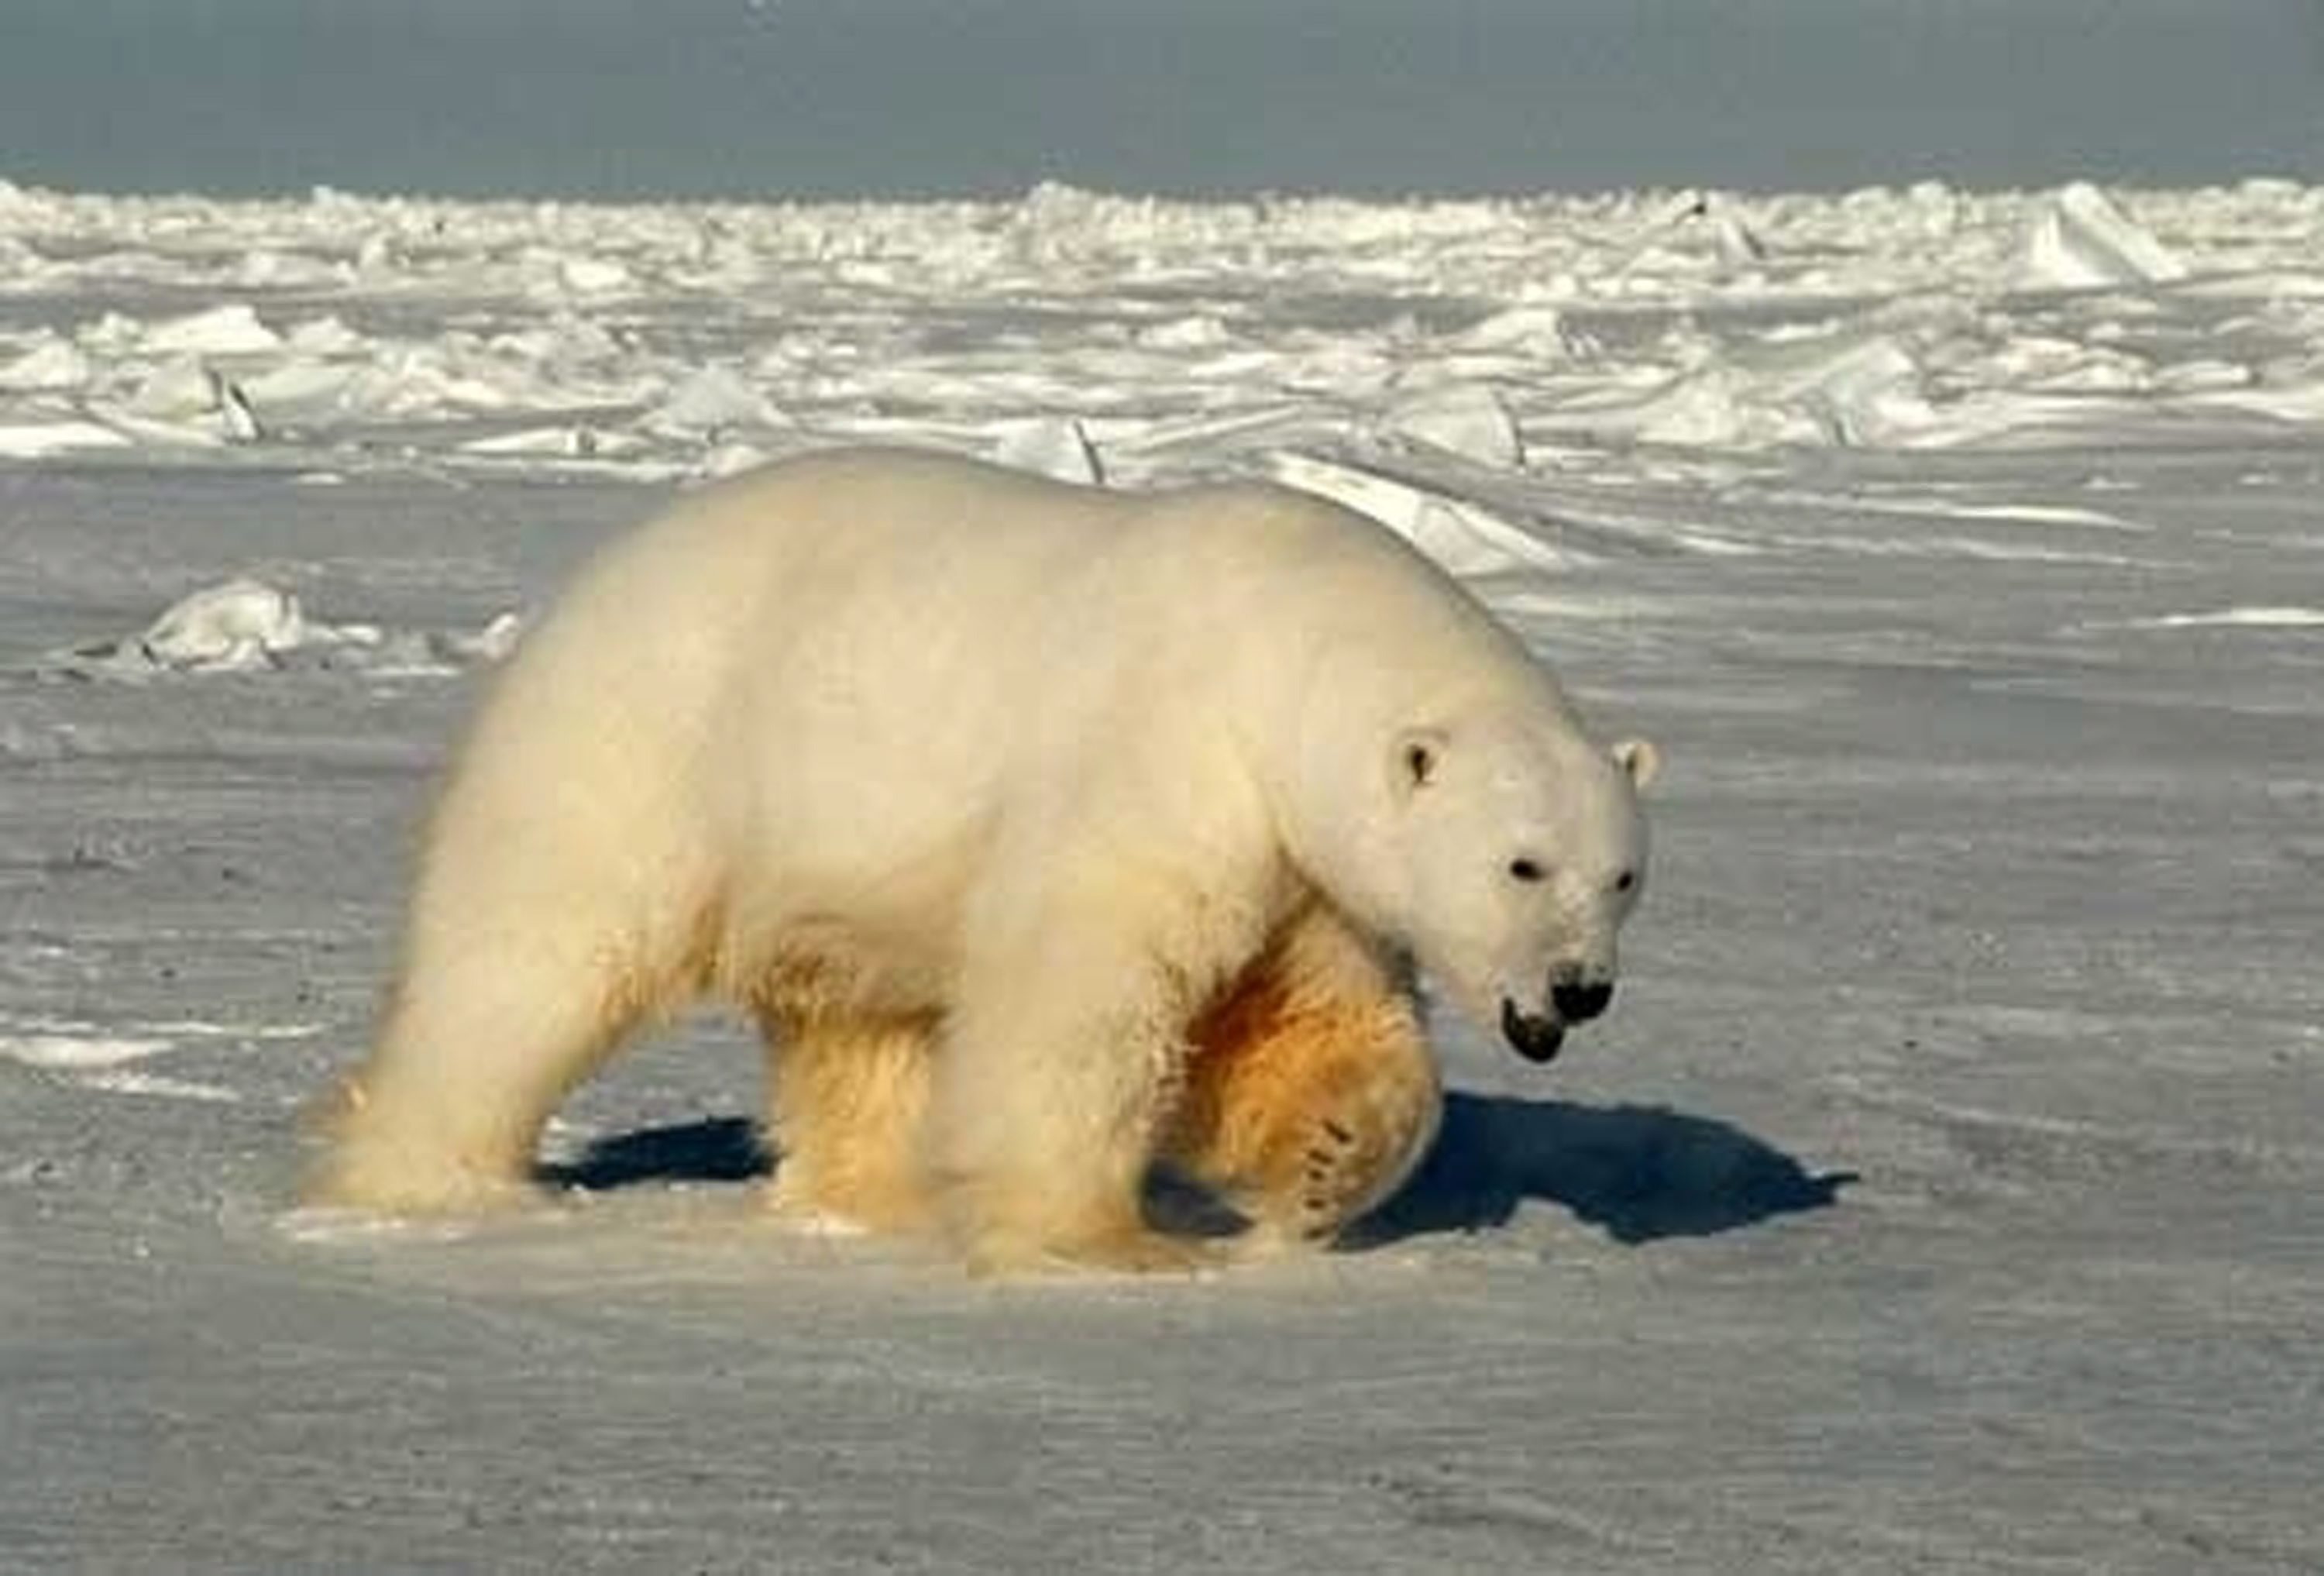 A male polar bear in the Beaufort Sea in 2005. In the event of an oil spill, de-oiling Arctic wildlife like the polar bear would pose several serious challenges.  (Steven C. Amstrup/USGS/AP)